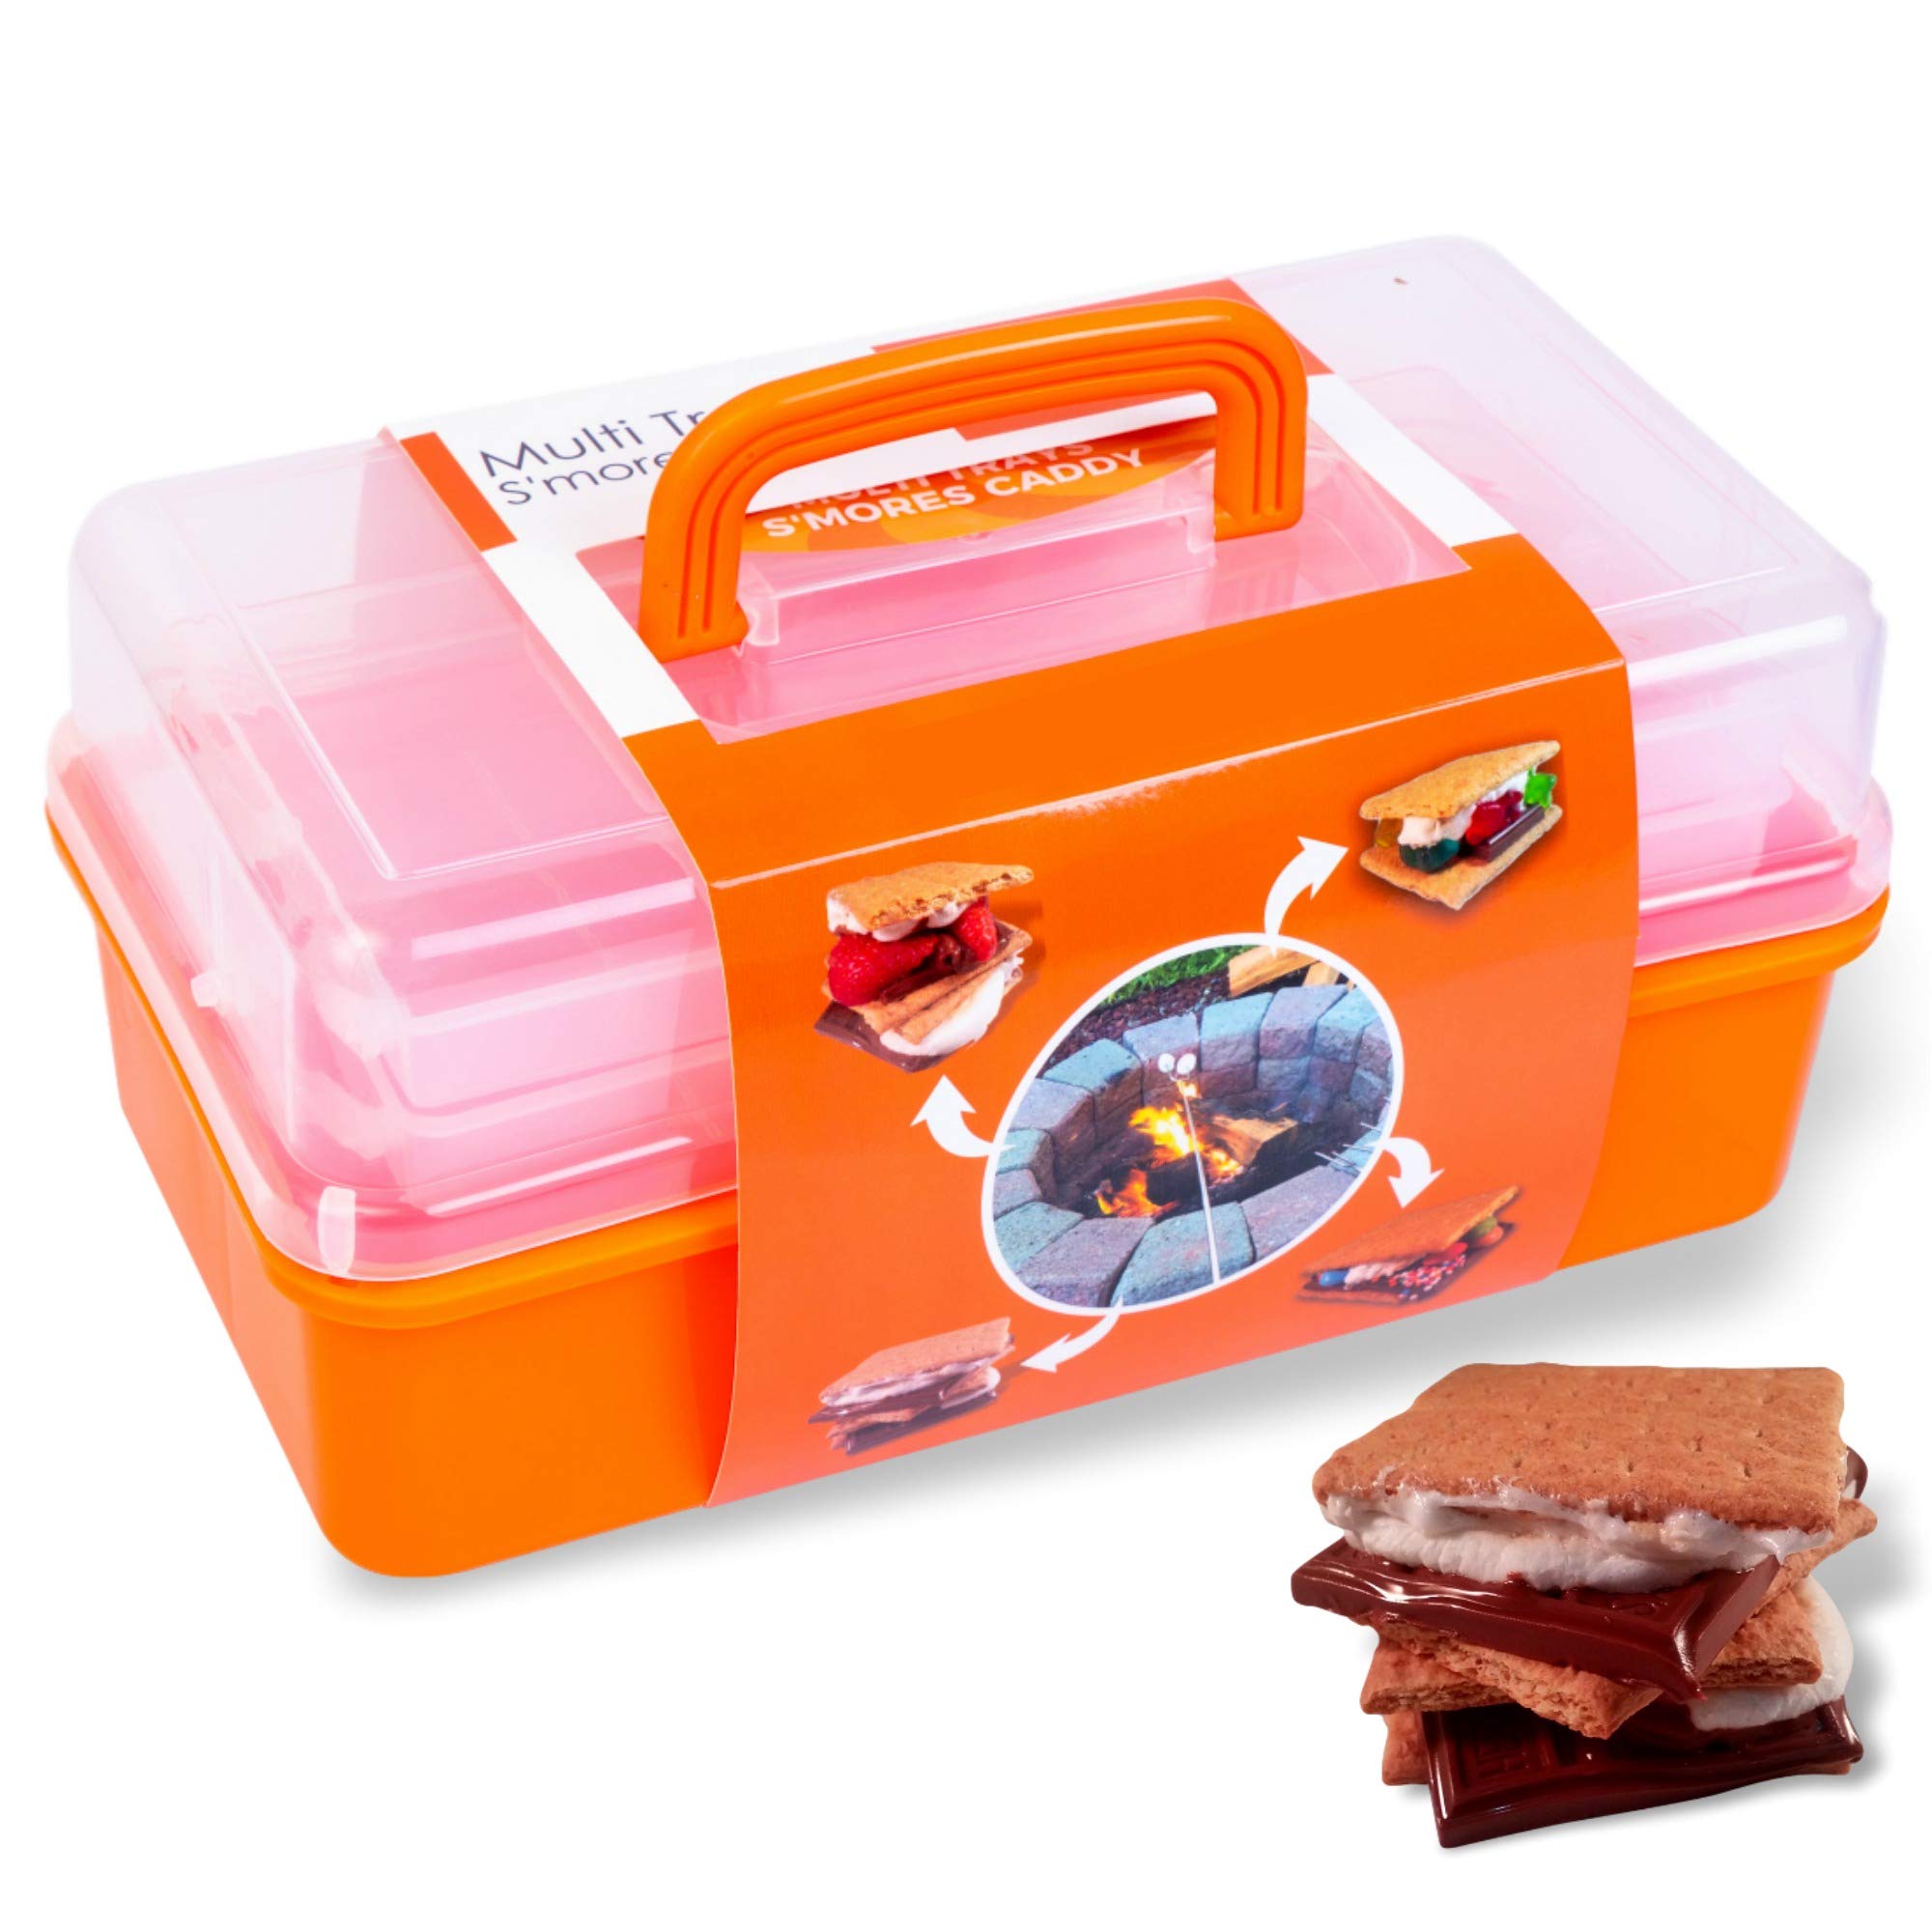 Book Cover SUMPRI Smores Caddy with TWO FOLDING TRAYS -Smore Box That Keeps Your Marshmallow Roasting Sticks/Crackers/Chocolate Bars Organized -Fire Pit accessories Kit,Campfire Smore Skewers Storage Box(Orange)